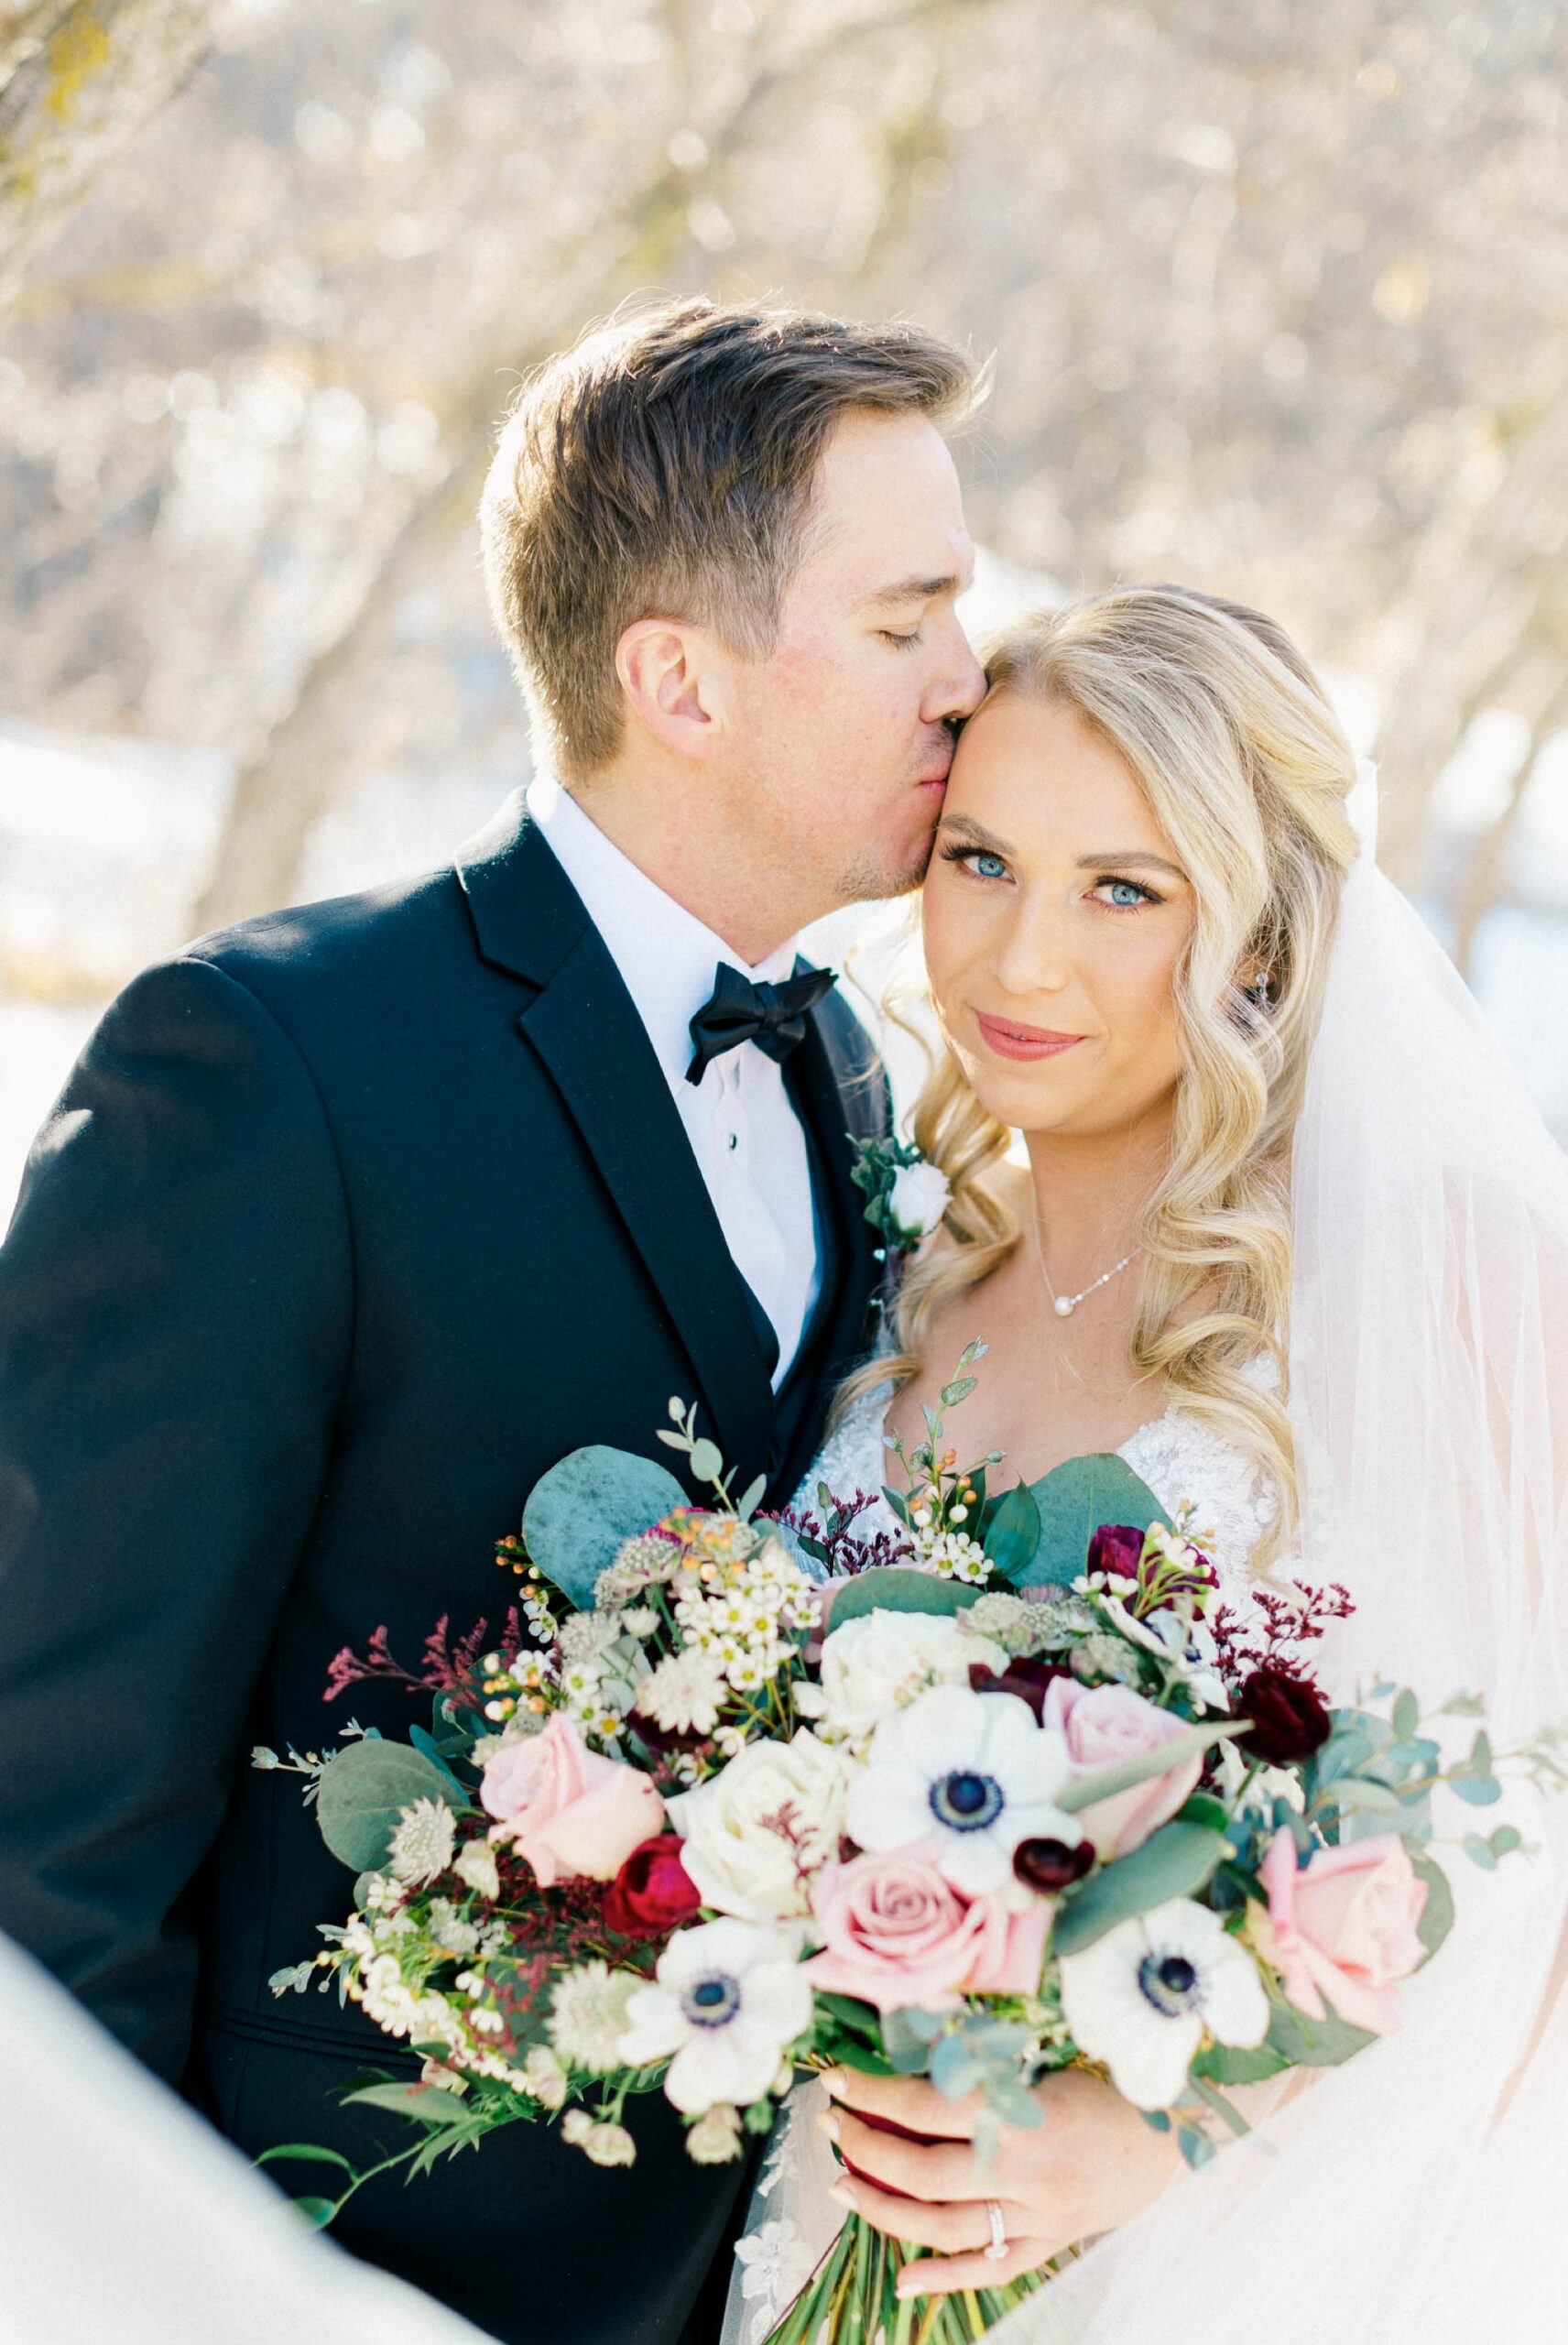 Portrait of a groom and a bride at a Winter wedding in Colorado Springs